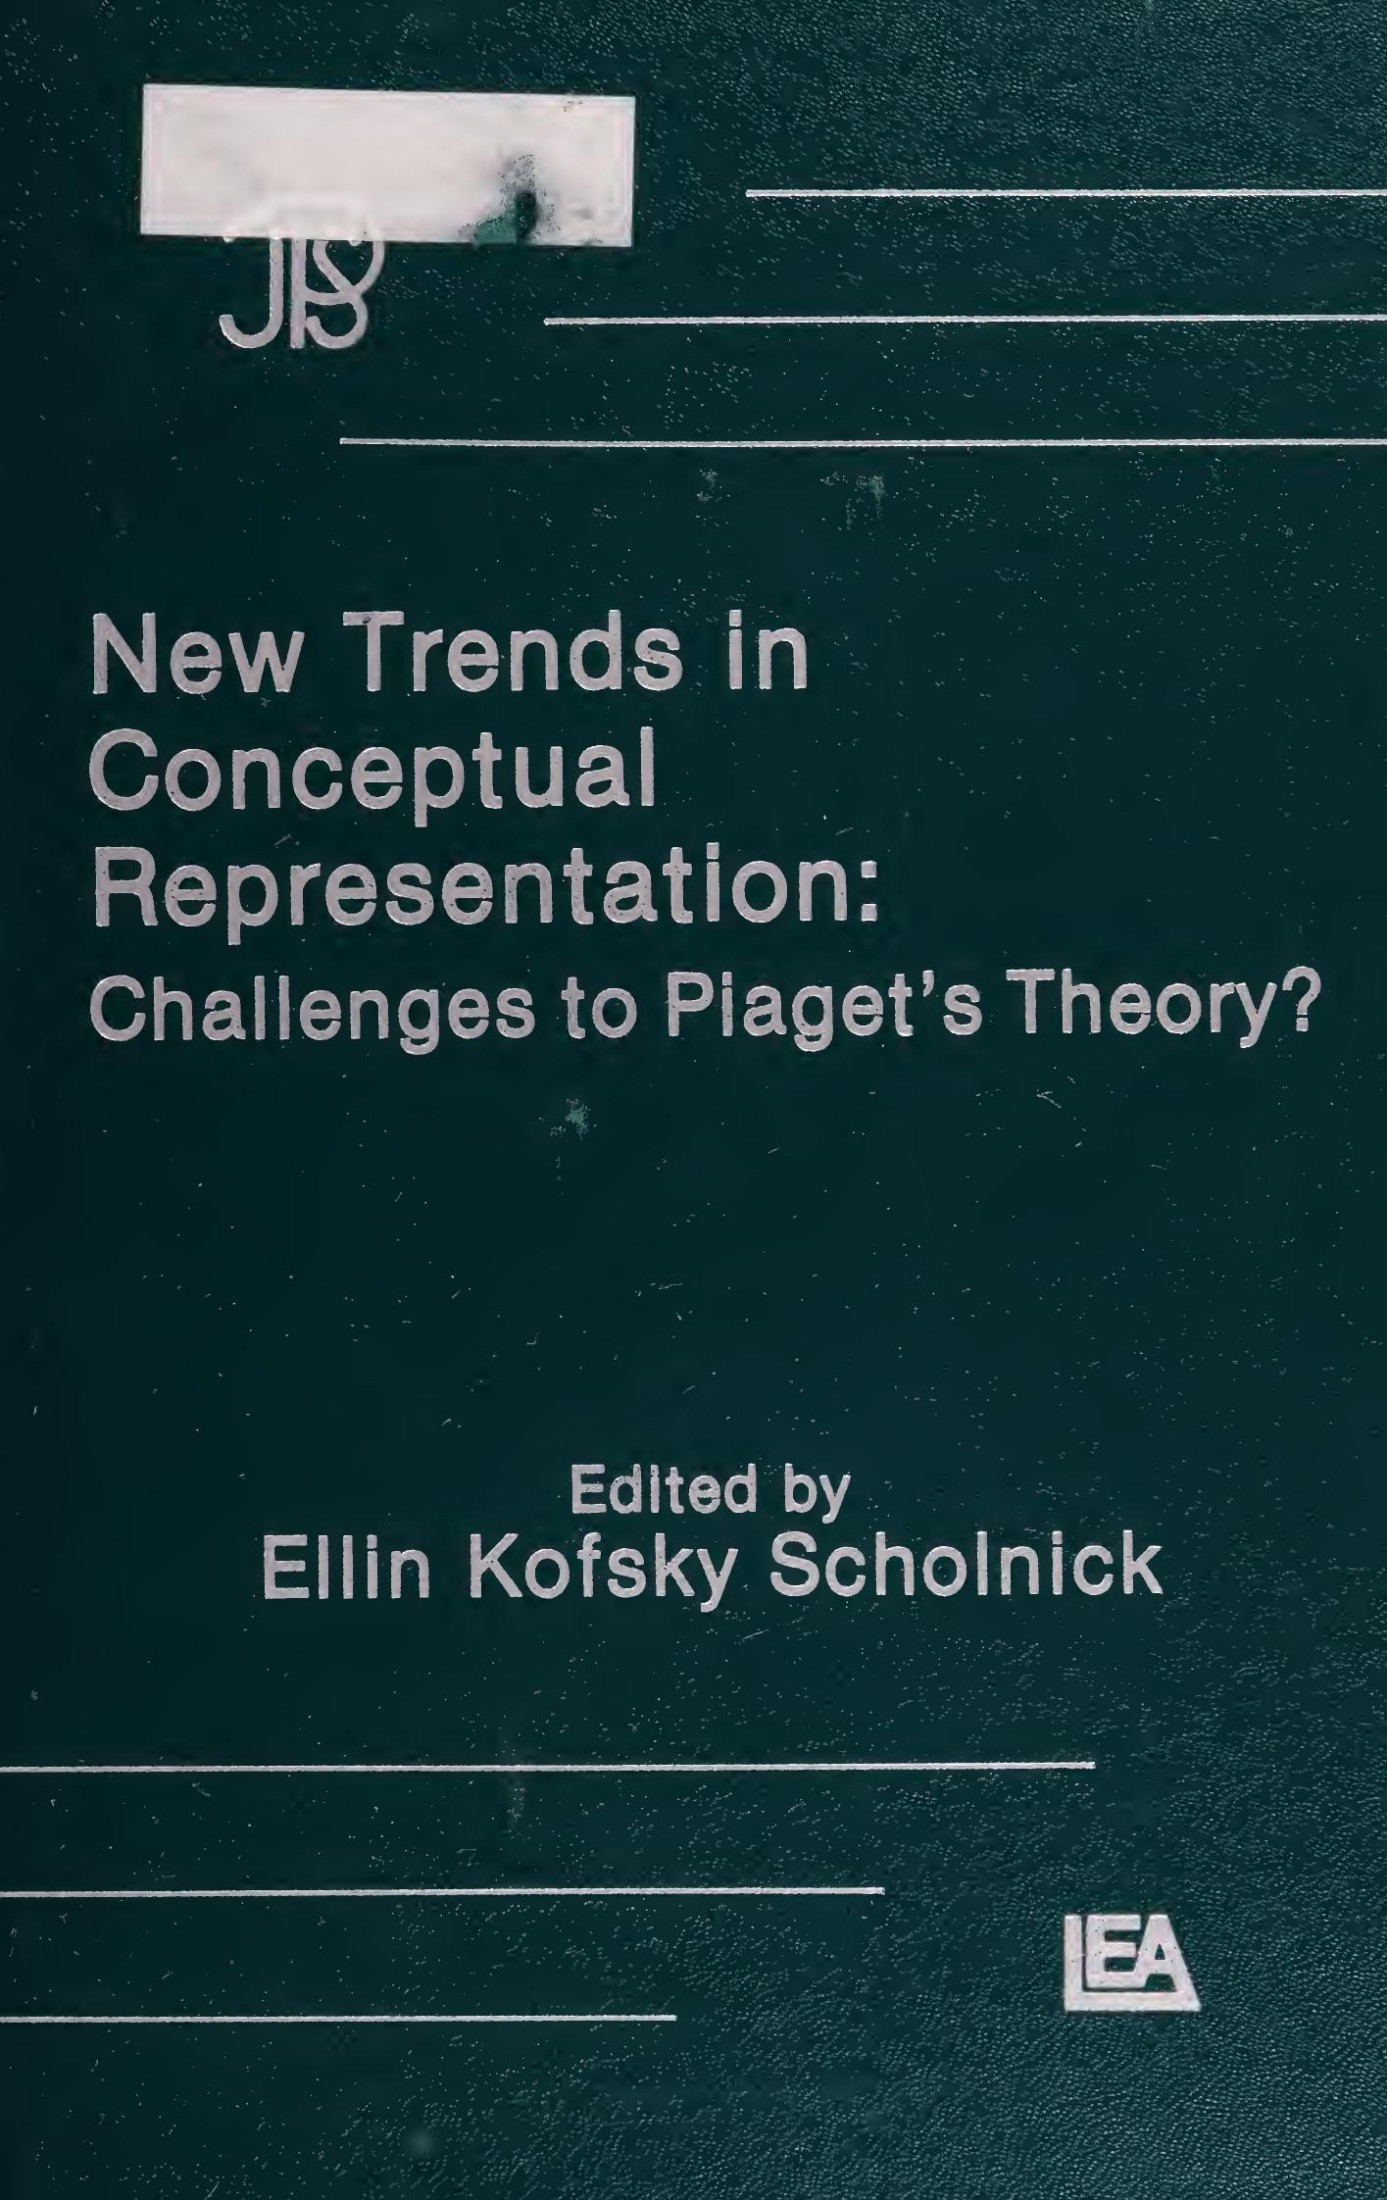 New Trends in Conceptual Representation: Challenges to Piaget's Theory